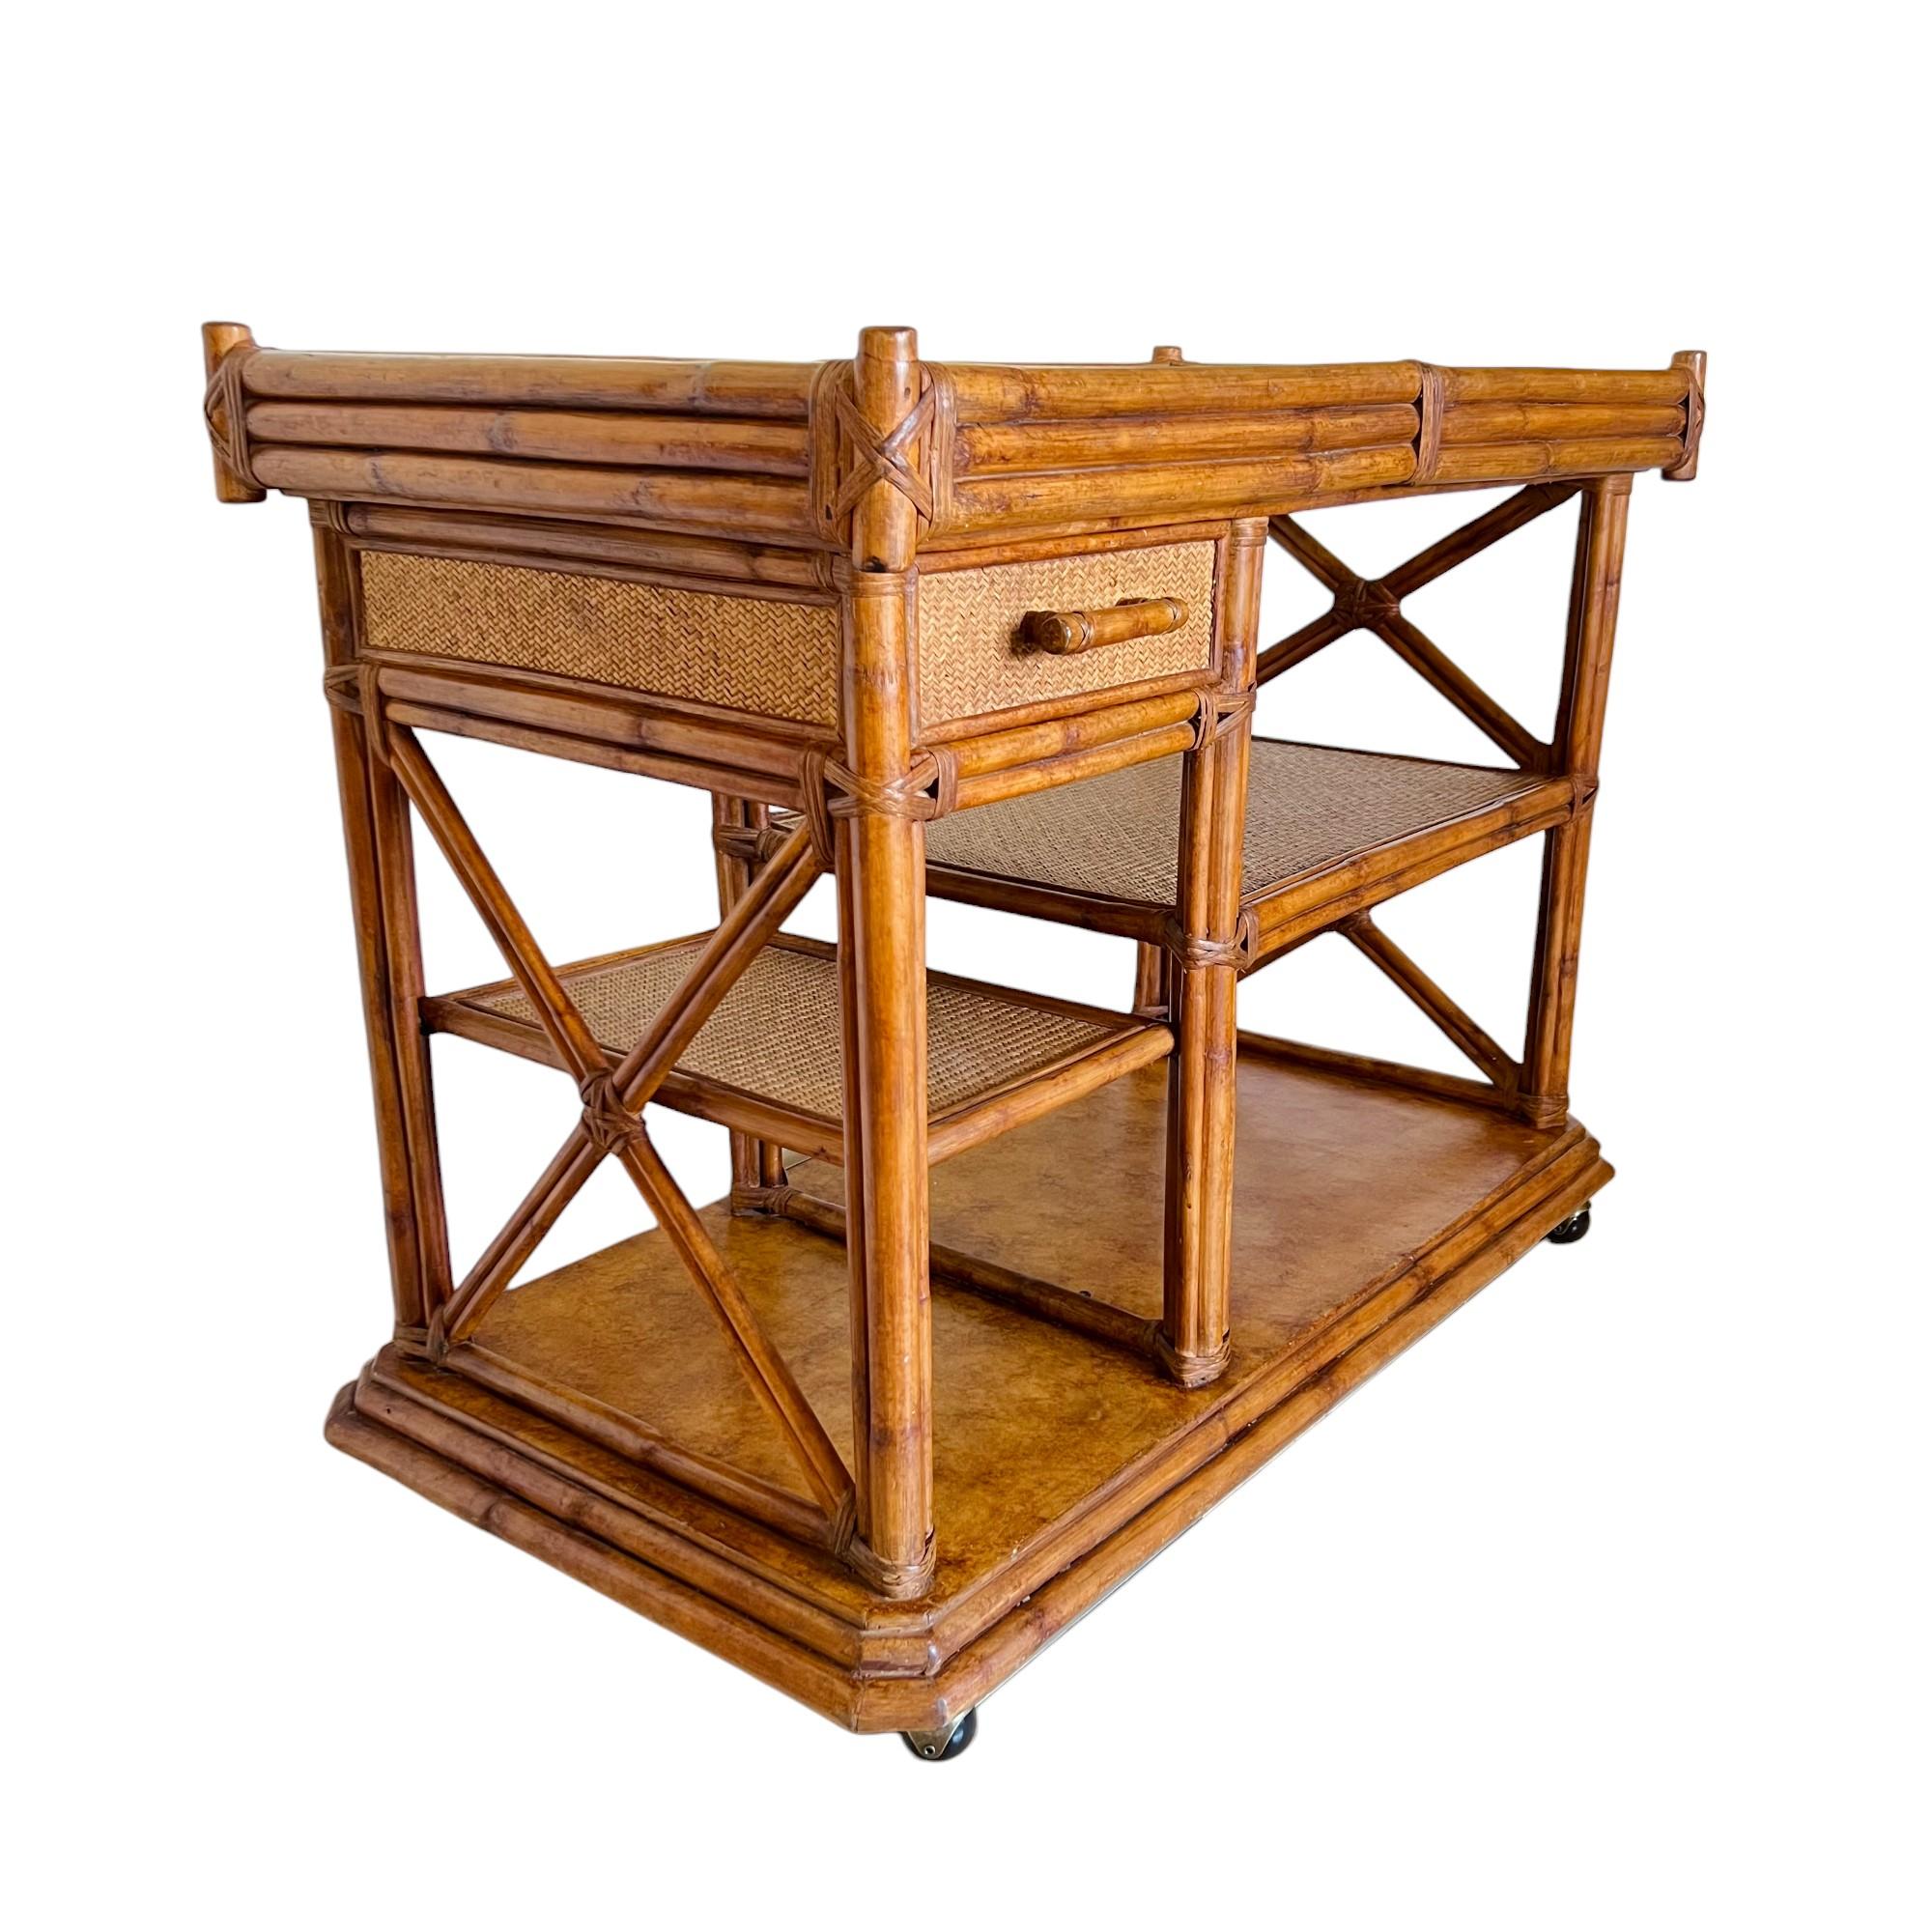 A vintage 1970's Palm Beach Regency rolling bar cart or server with extending top. Rattan framing with woven reed top surface, shelves, drawer face and side/back panels. This versatile piece features an expanding top that slides out to reveal a